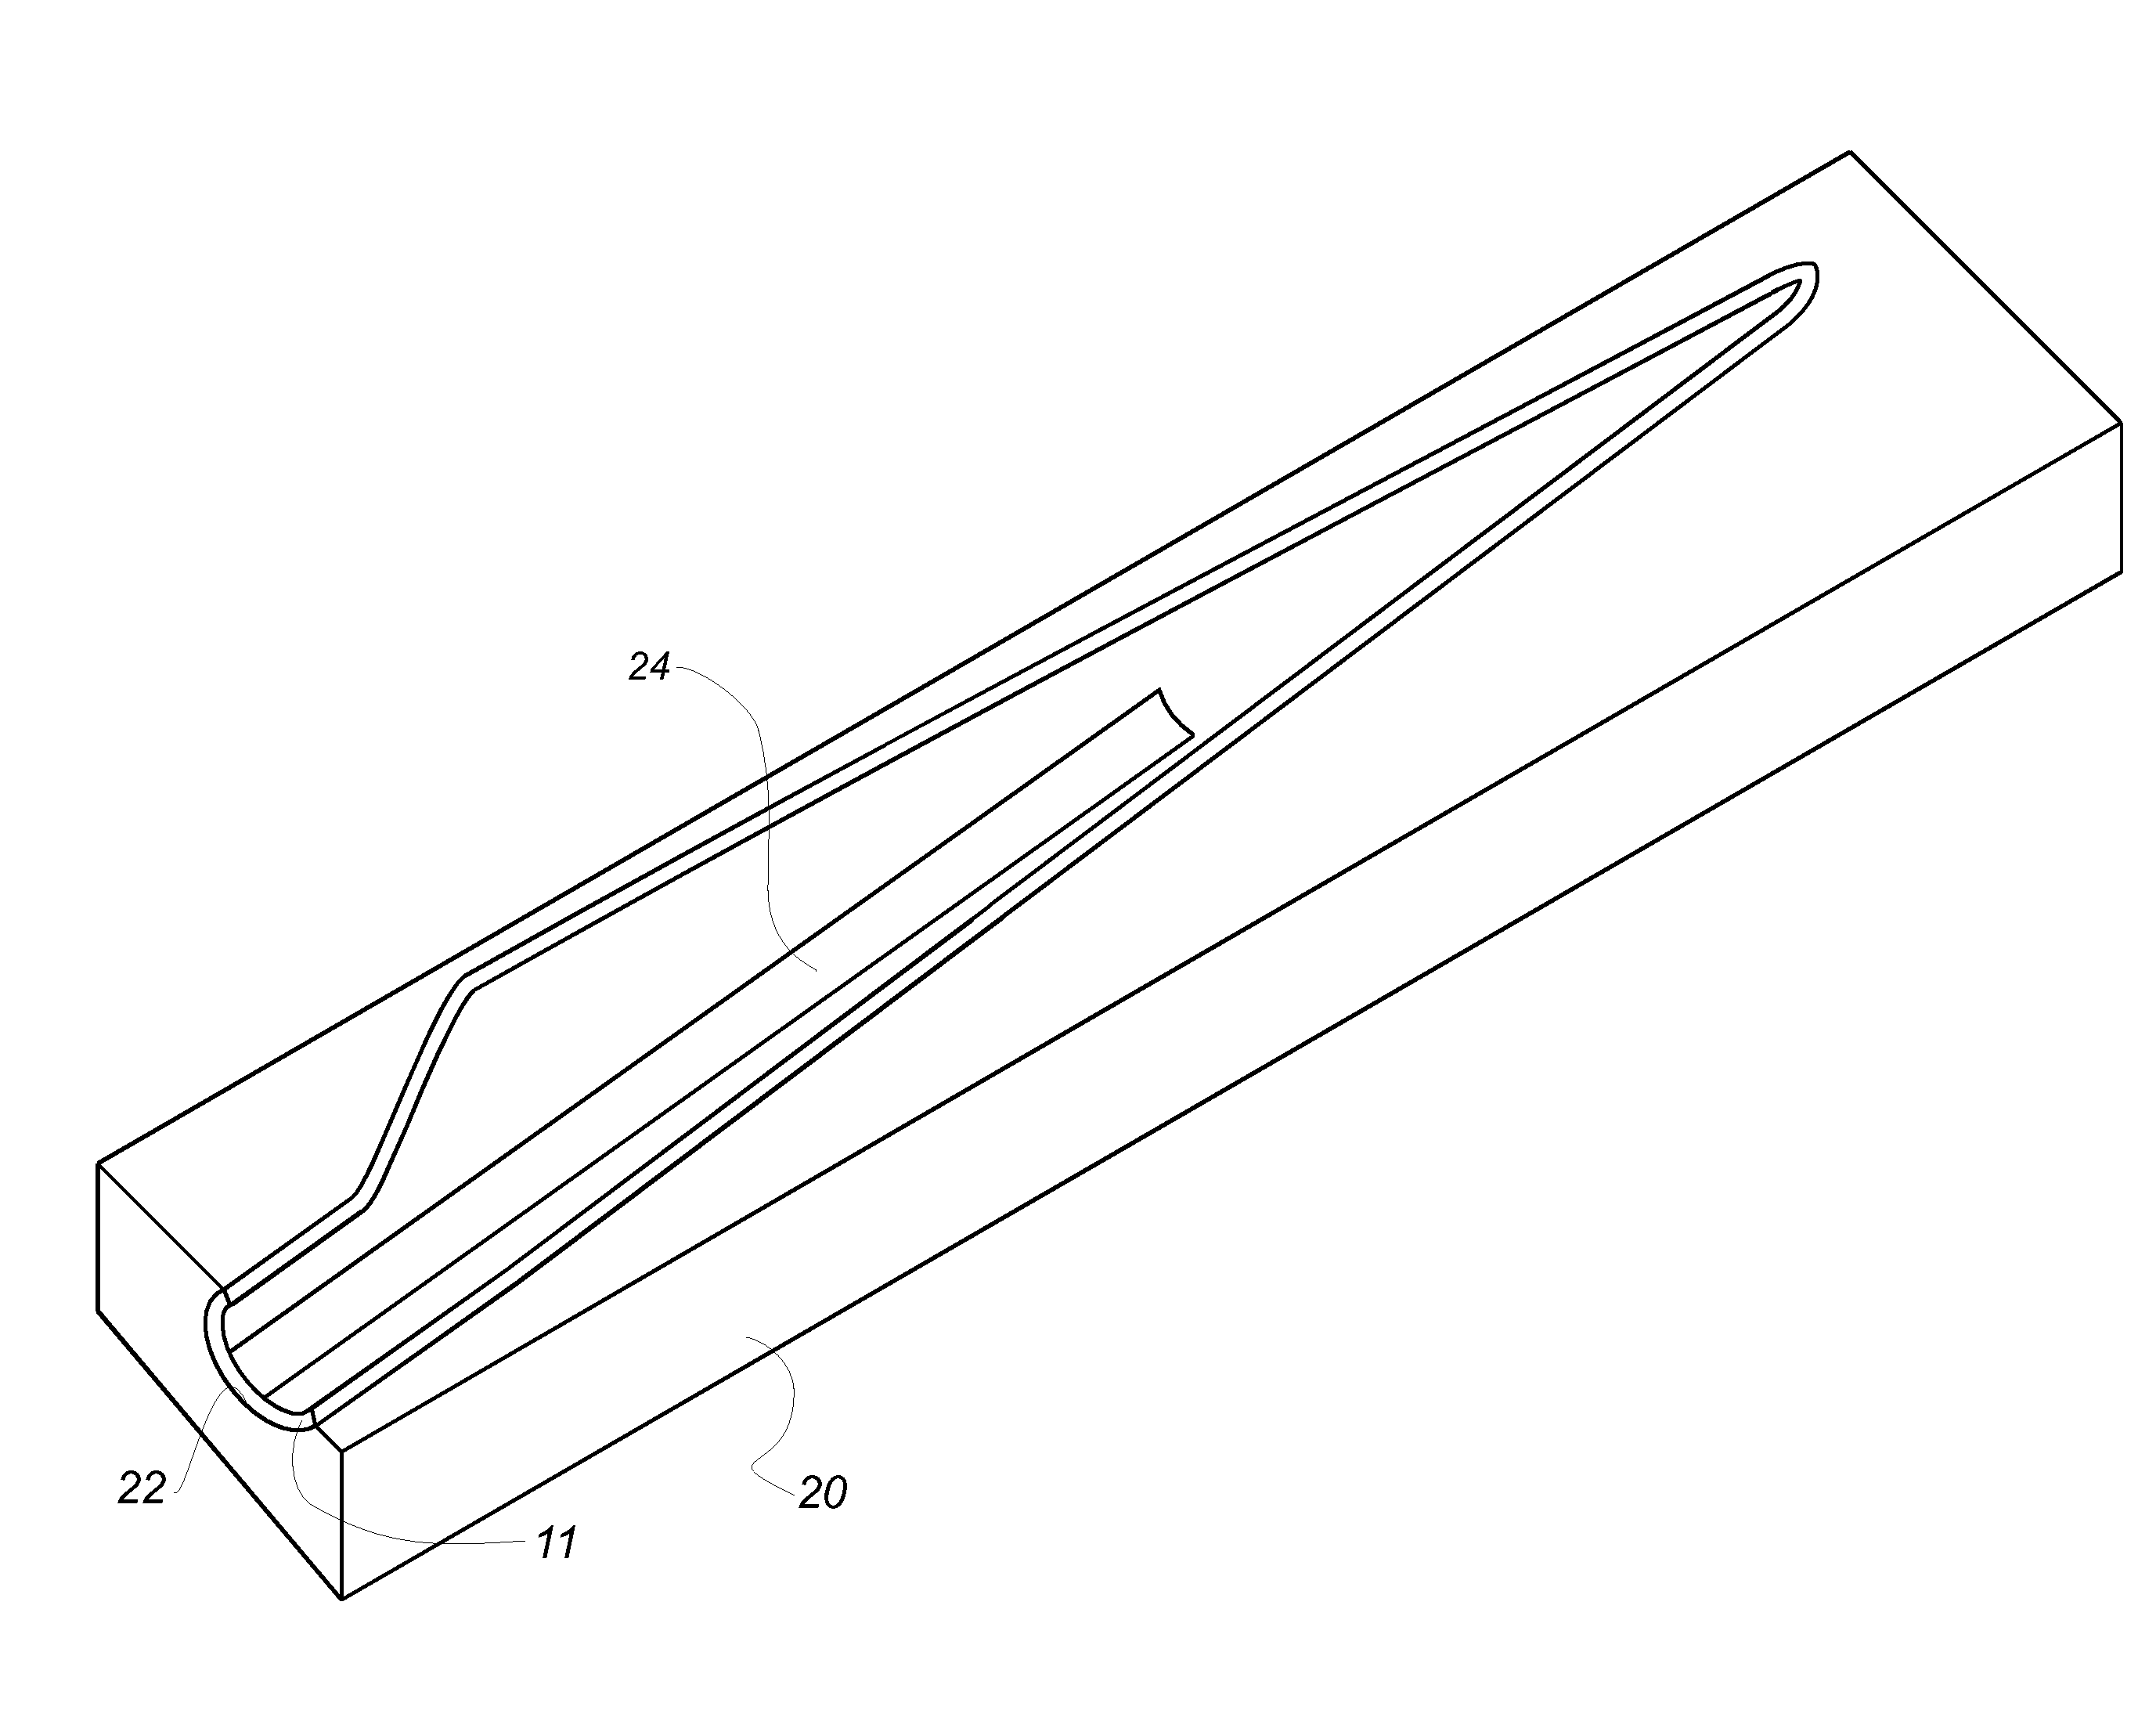 System and Method for Assisting in the Manufacture of a Wind Turbine Blade Shell